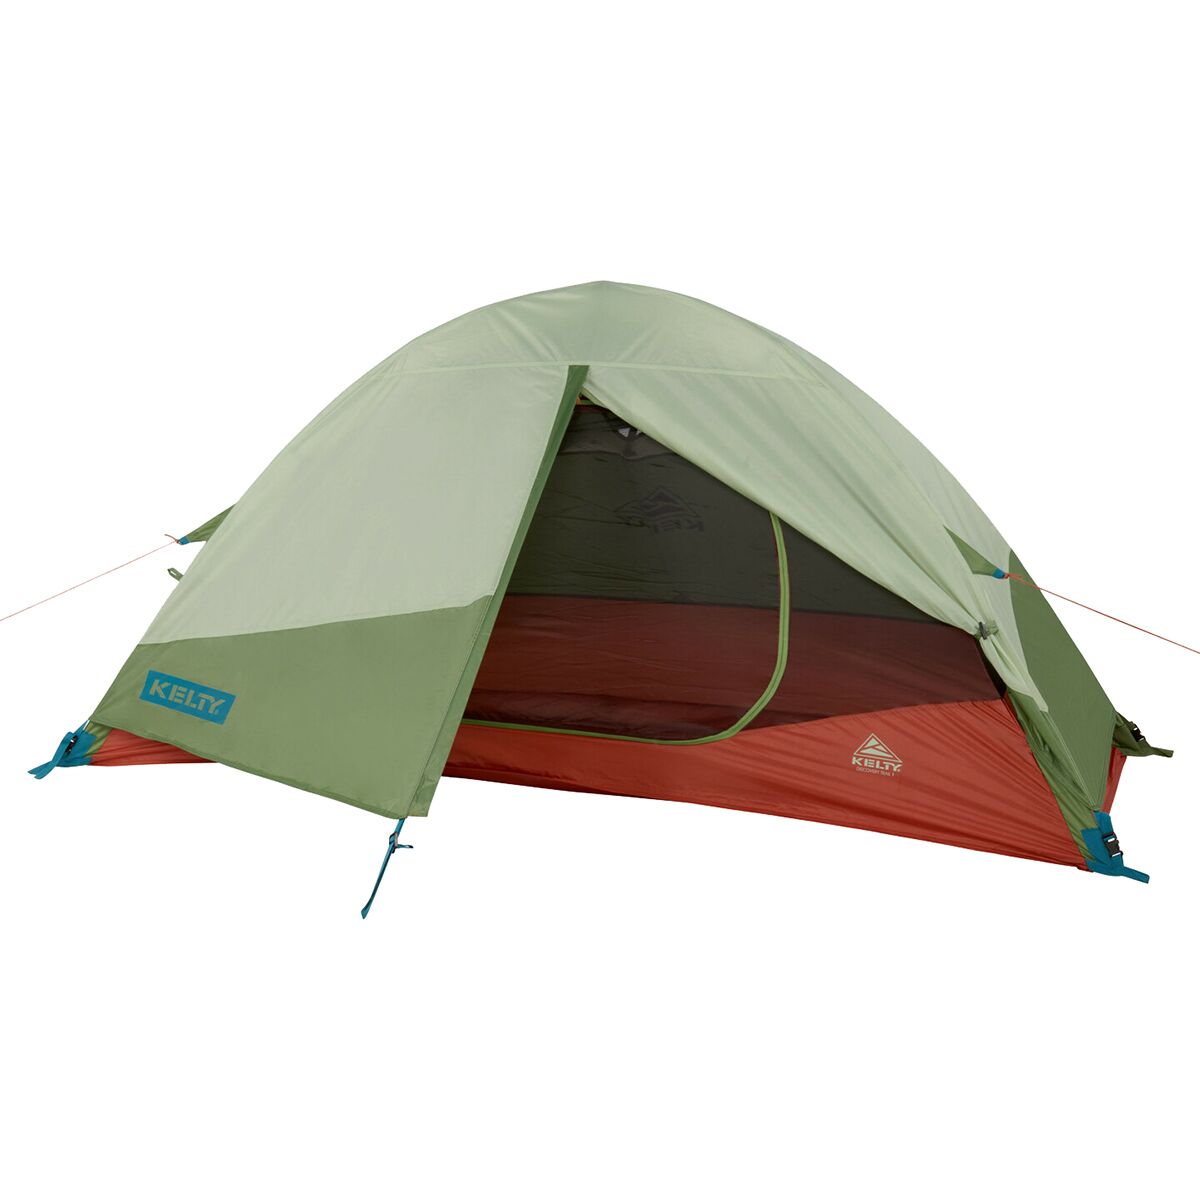 Kelty Discovery Trail 1 Tent: 1-Person 3-Season